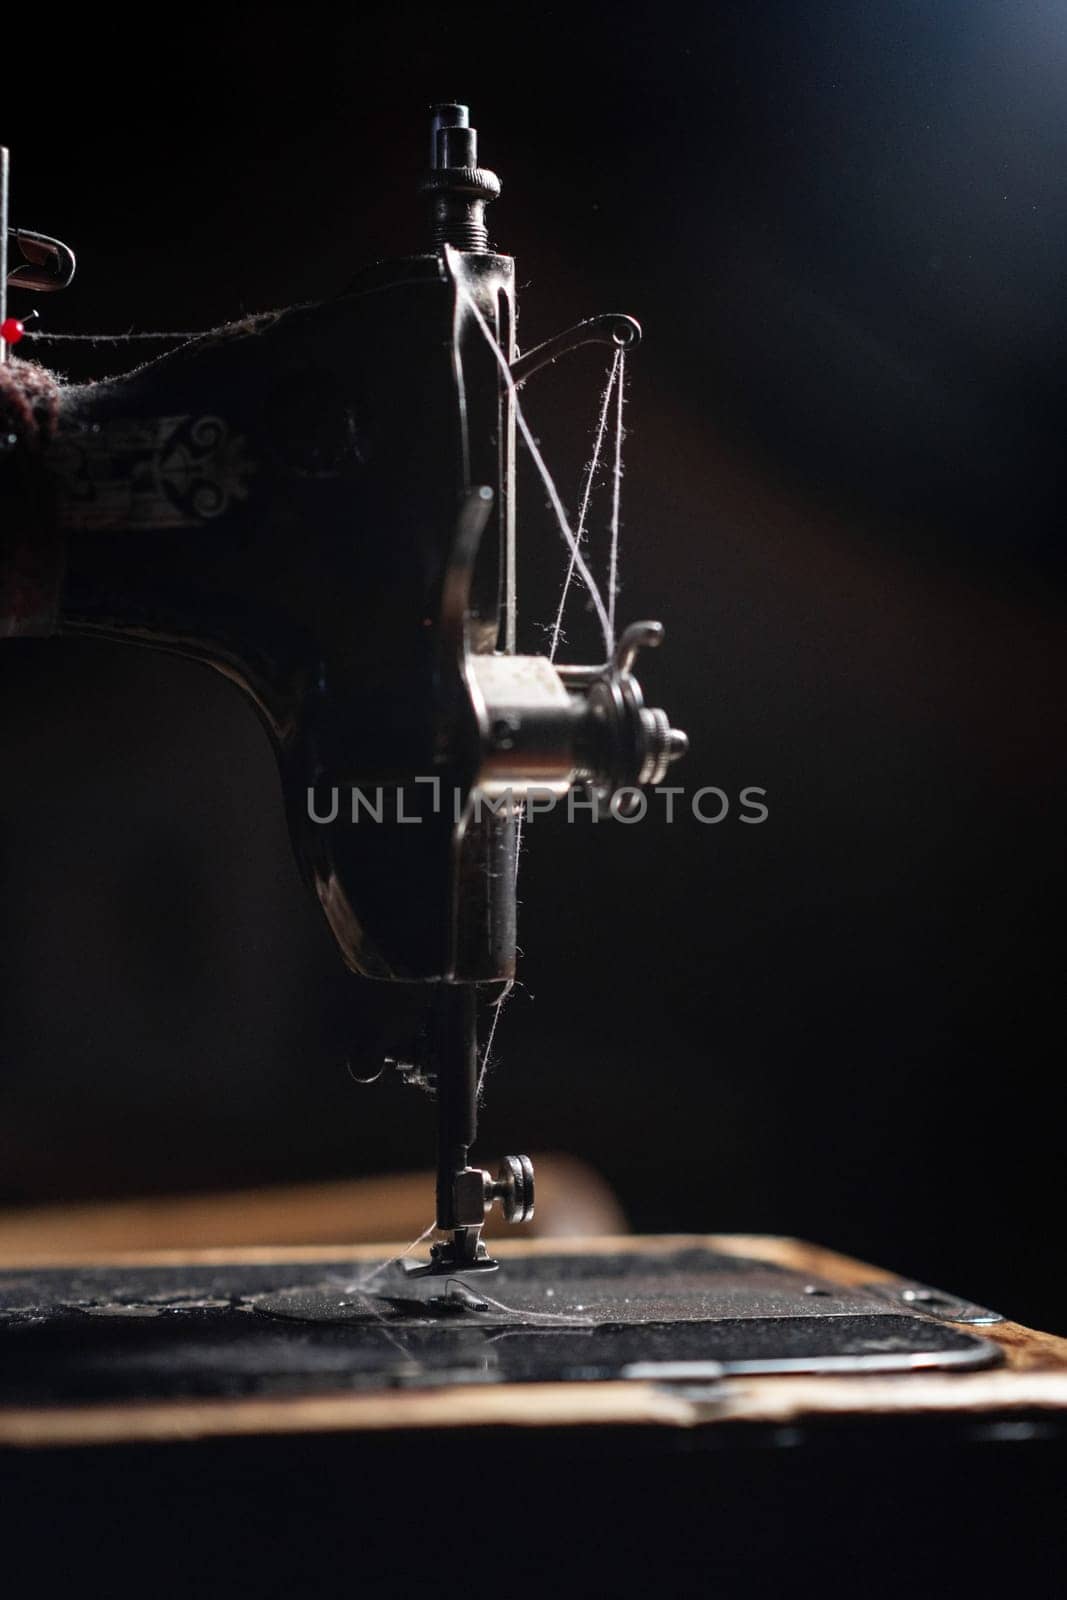 An old sewing machine stands on the table at home ready to work and sew. Classic retro style manual sewing machine ready for sewing work. The machine is old style made of metal with floral patterns